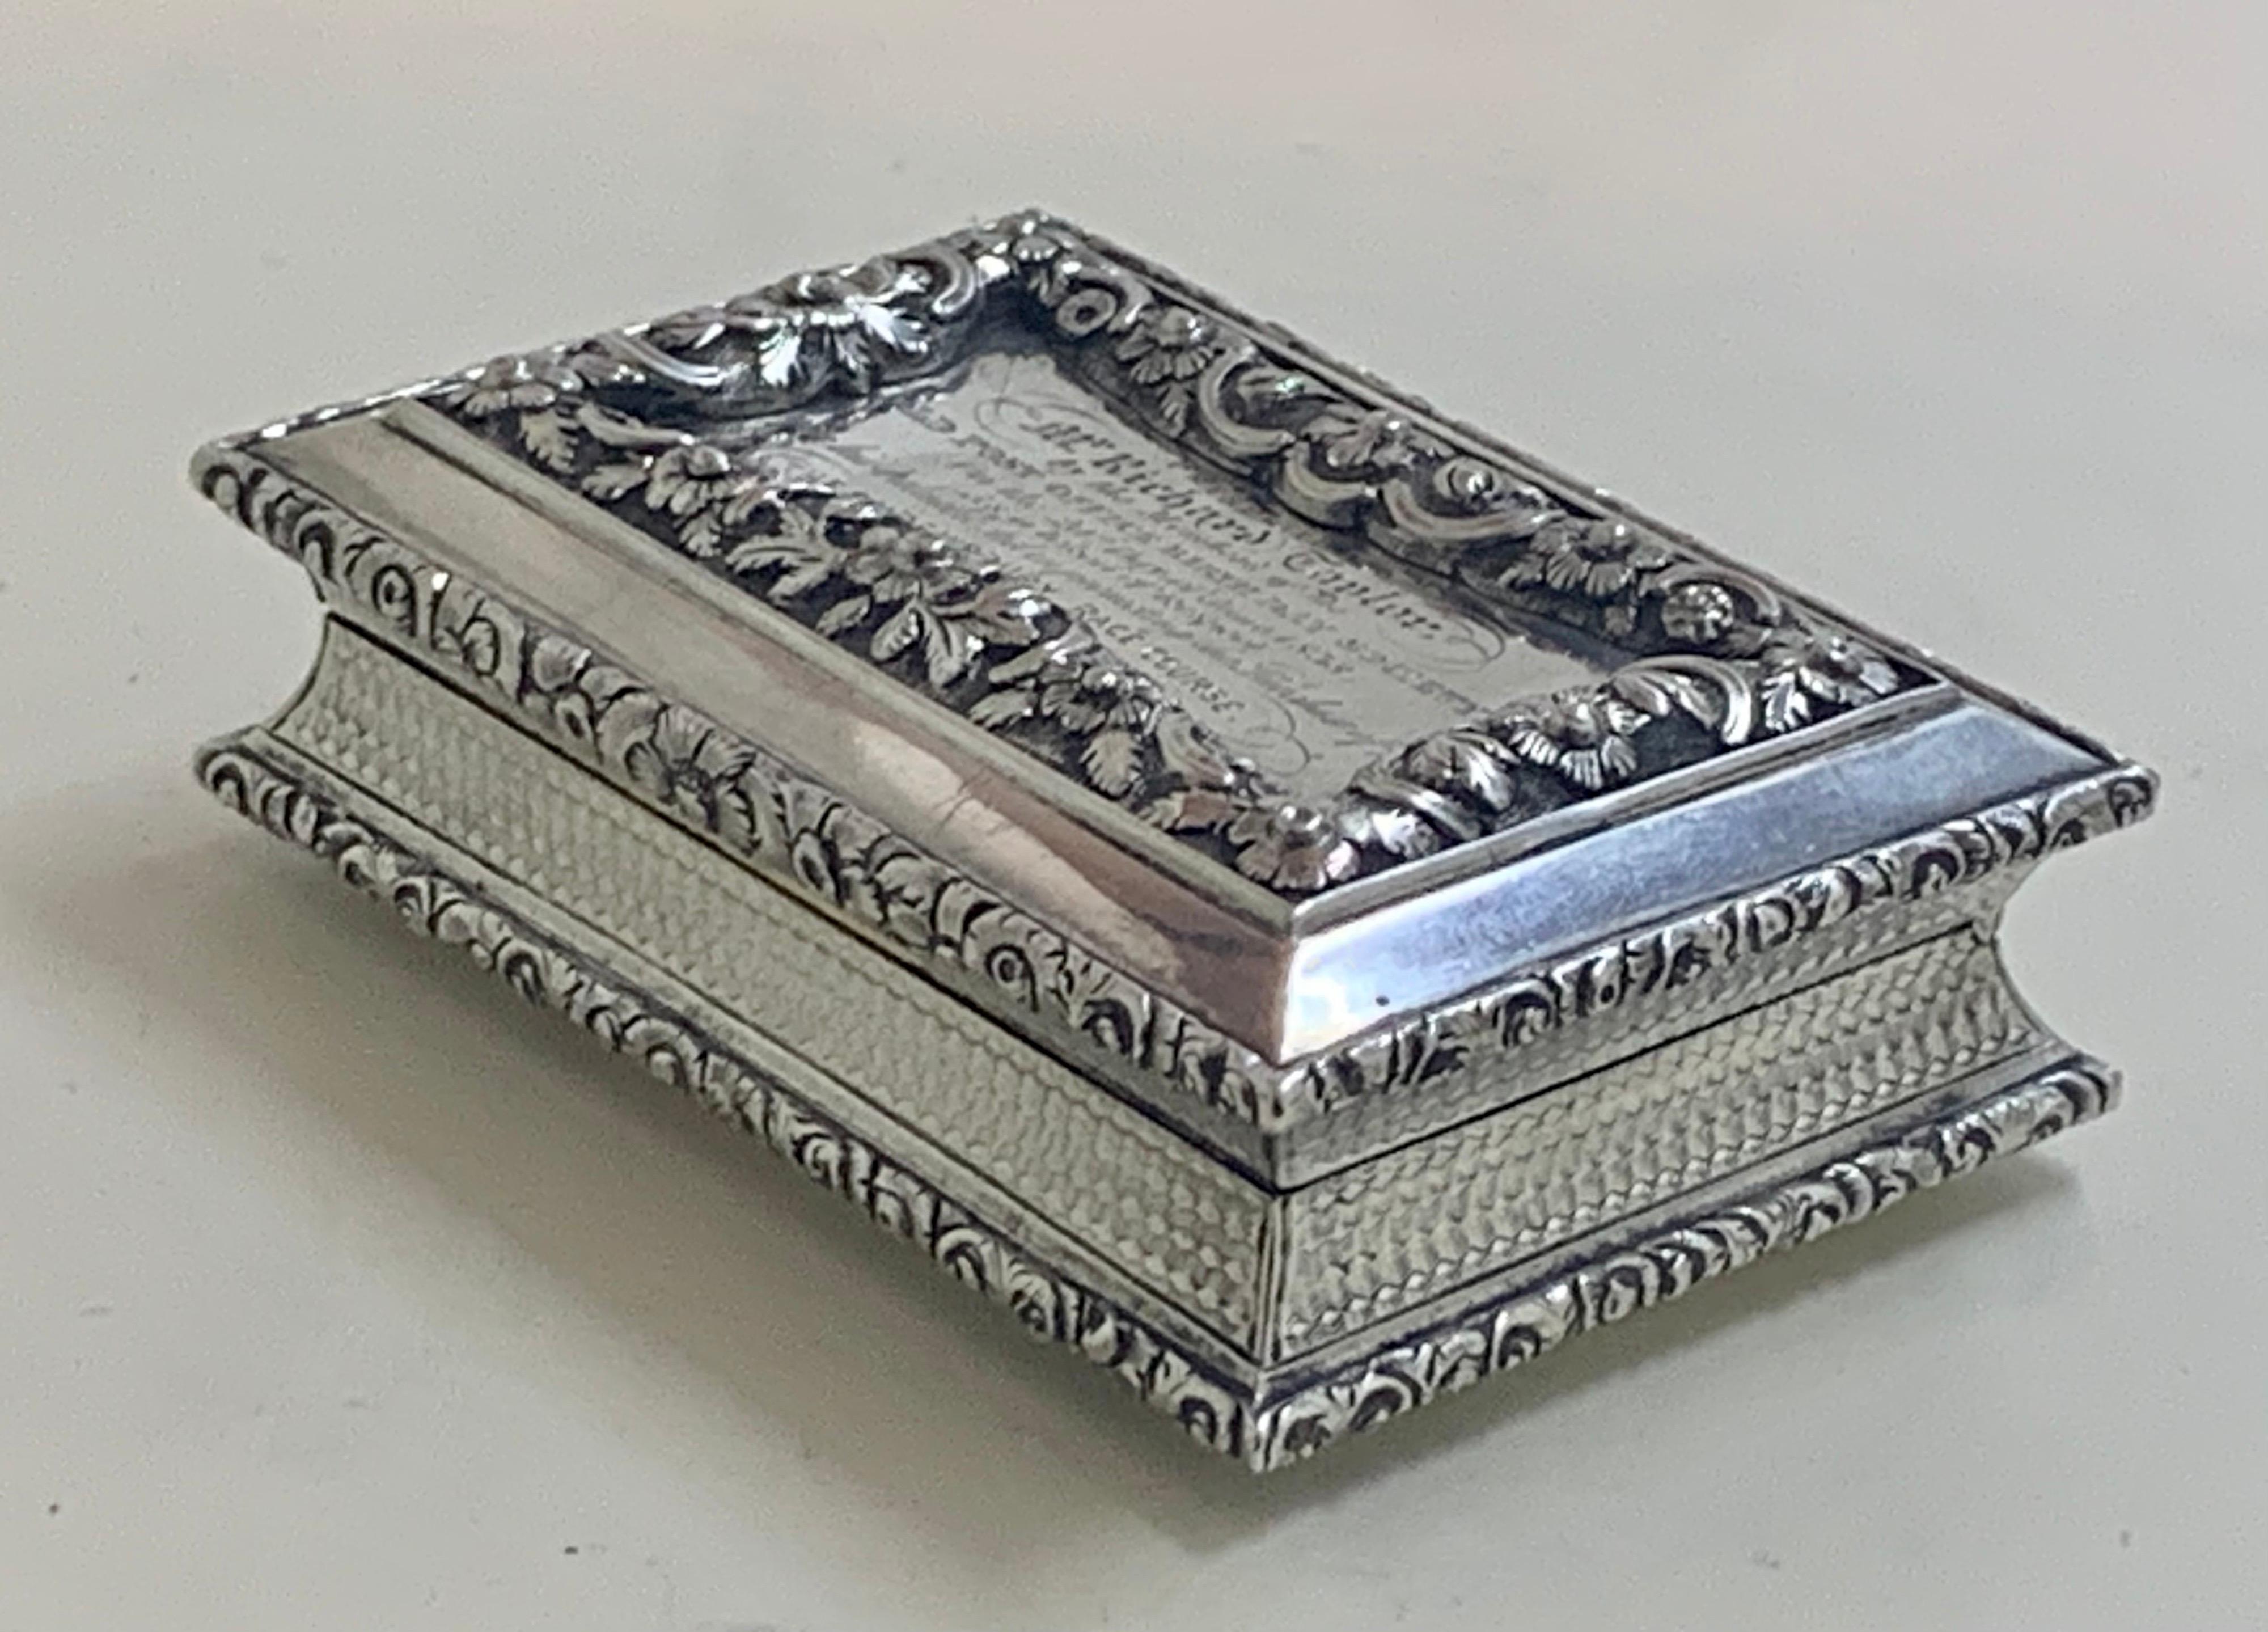 This superb quality Georgian silver table snuff box was made in Birmingham in 1836 by W.S and measures 3 1/2 inches in length by 2.35 inches wide and is 1 1/8 inches tall. It has beautifully cast decoration of flowers, foliage and scrolling acanthus